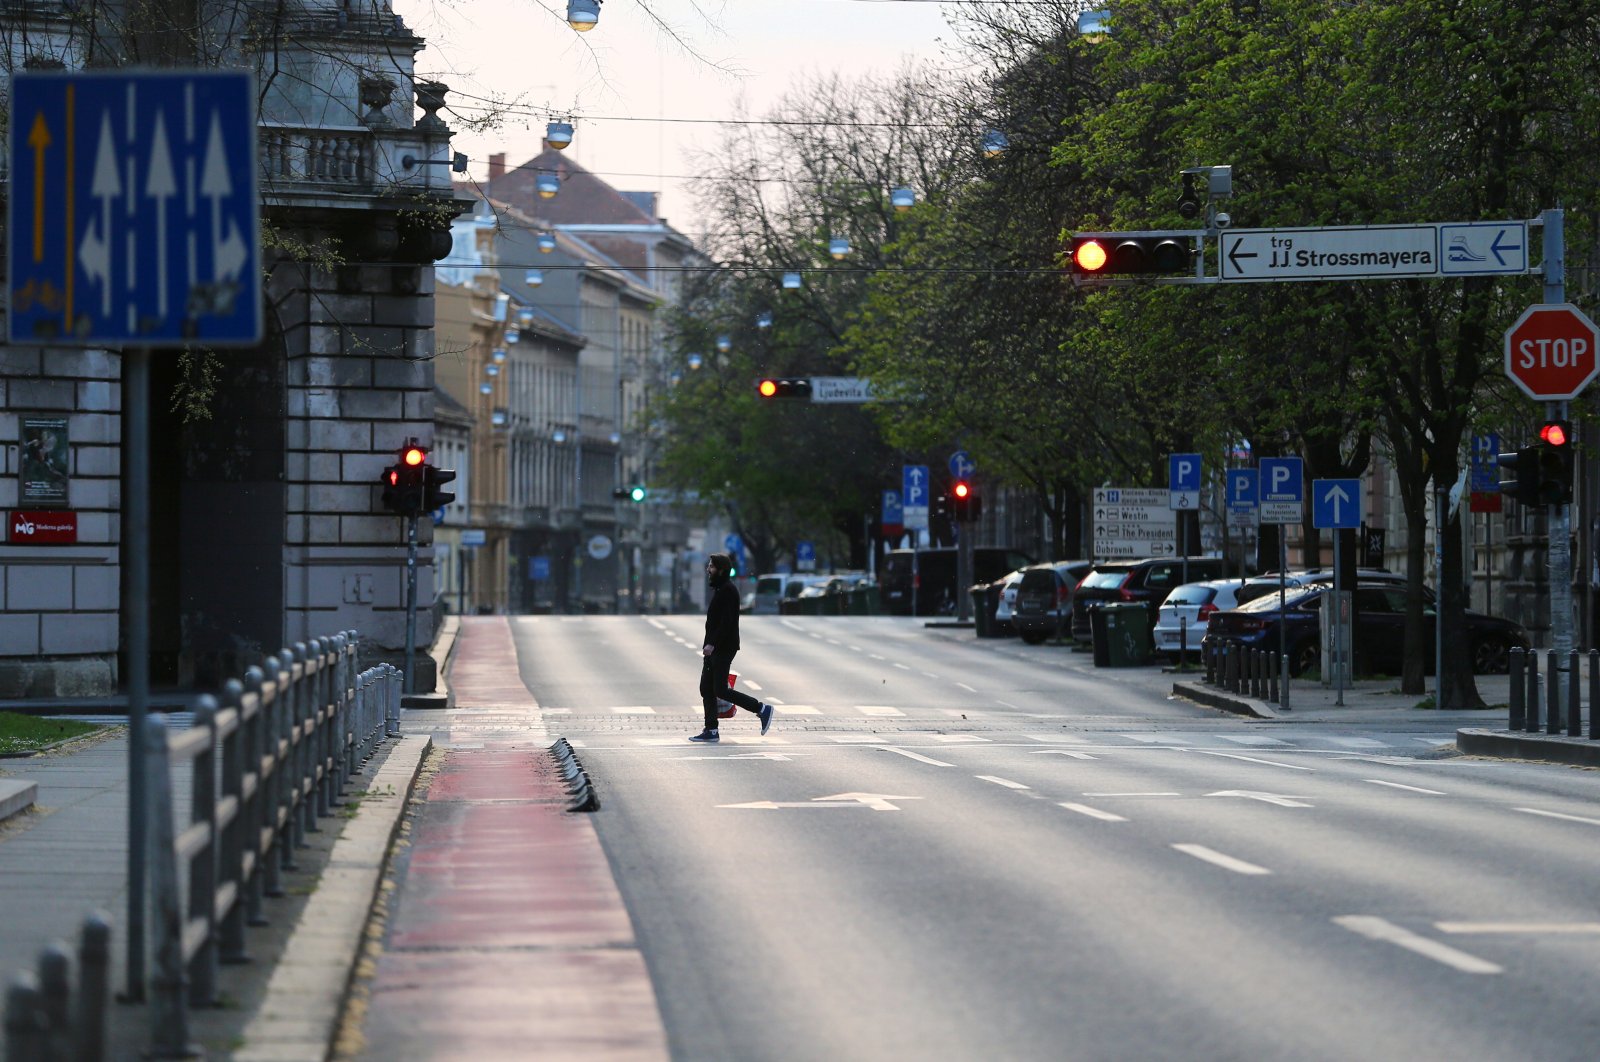 A man crosses a street in Zagreb, Croatia, where authorities have been stepping up measures to fight the coronavirus outbreak, March 21, 2020. (Reuters Photo)